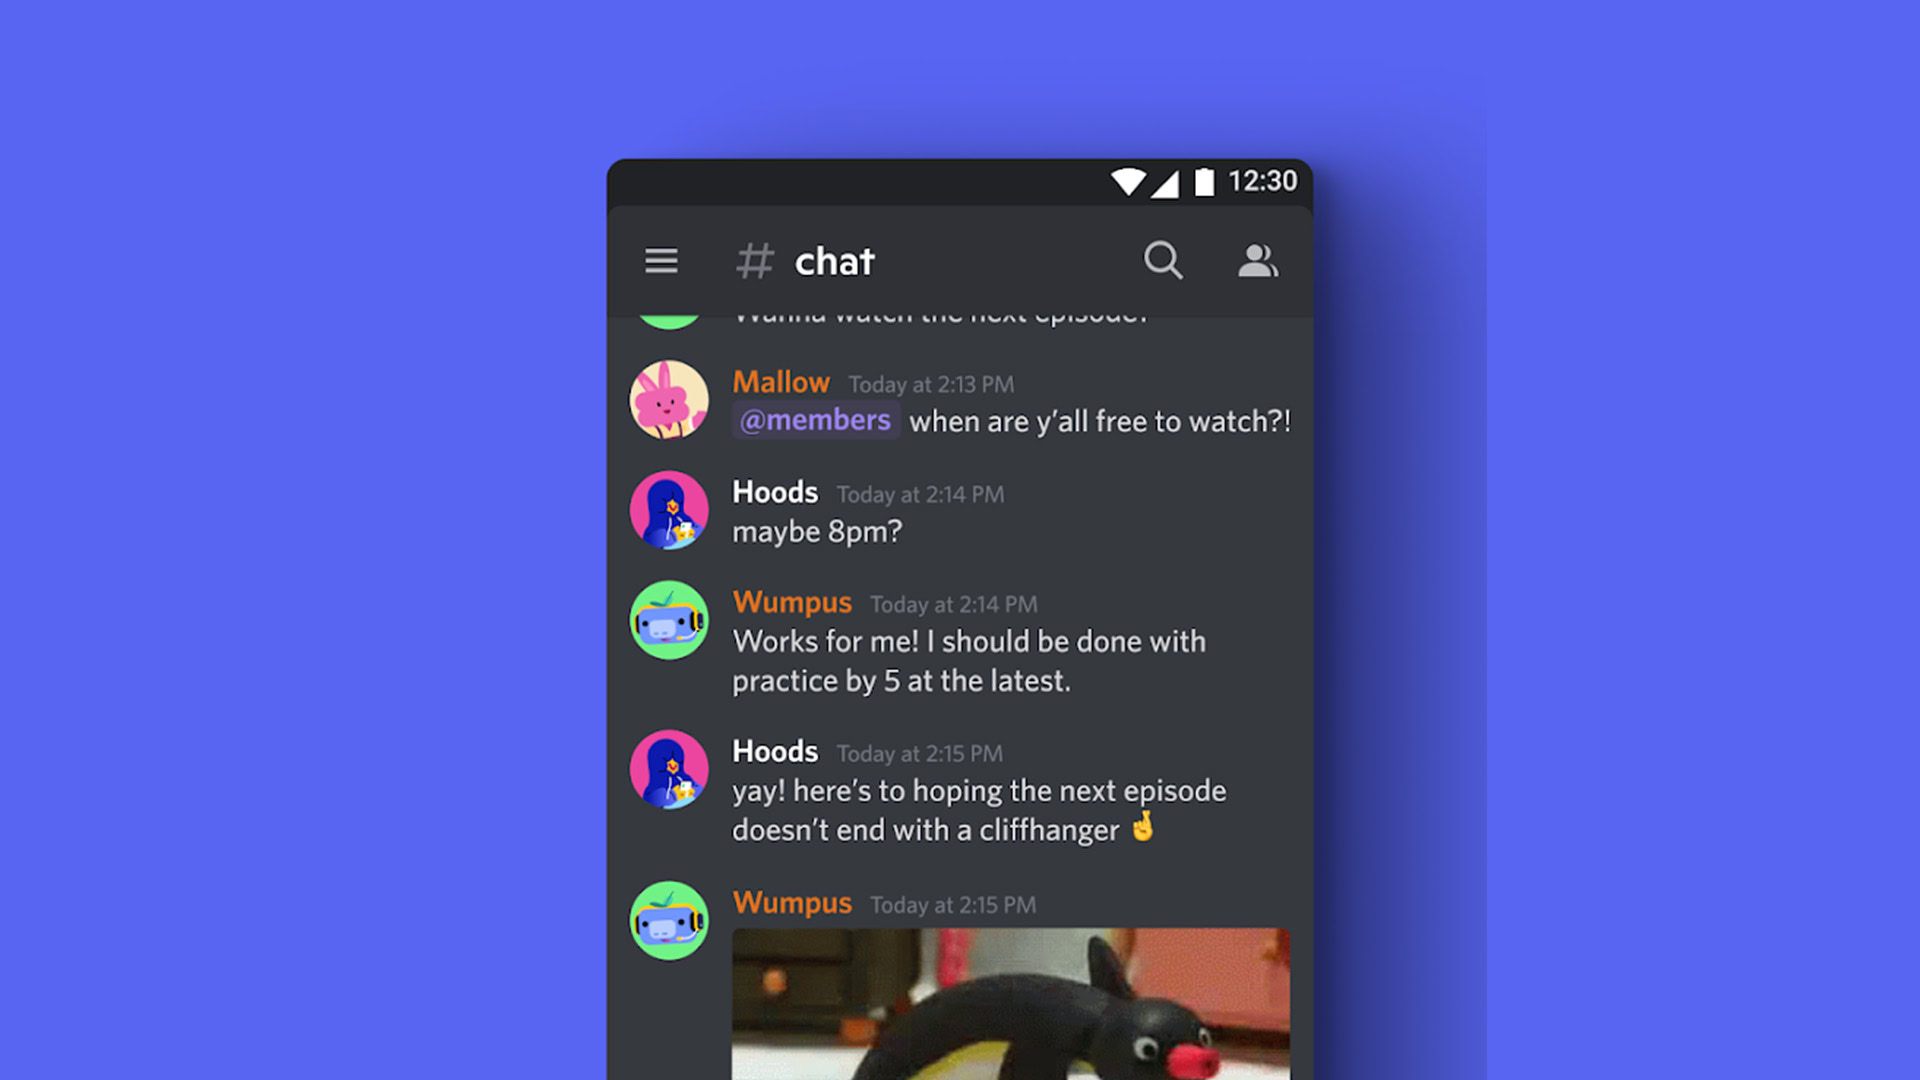 The best chat room apps for Android image